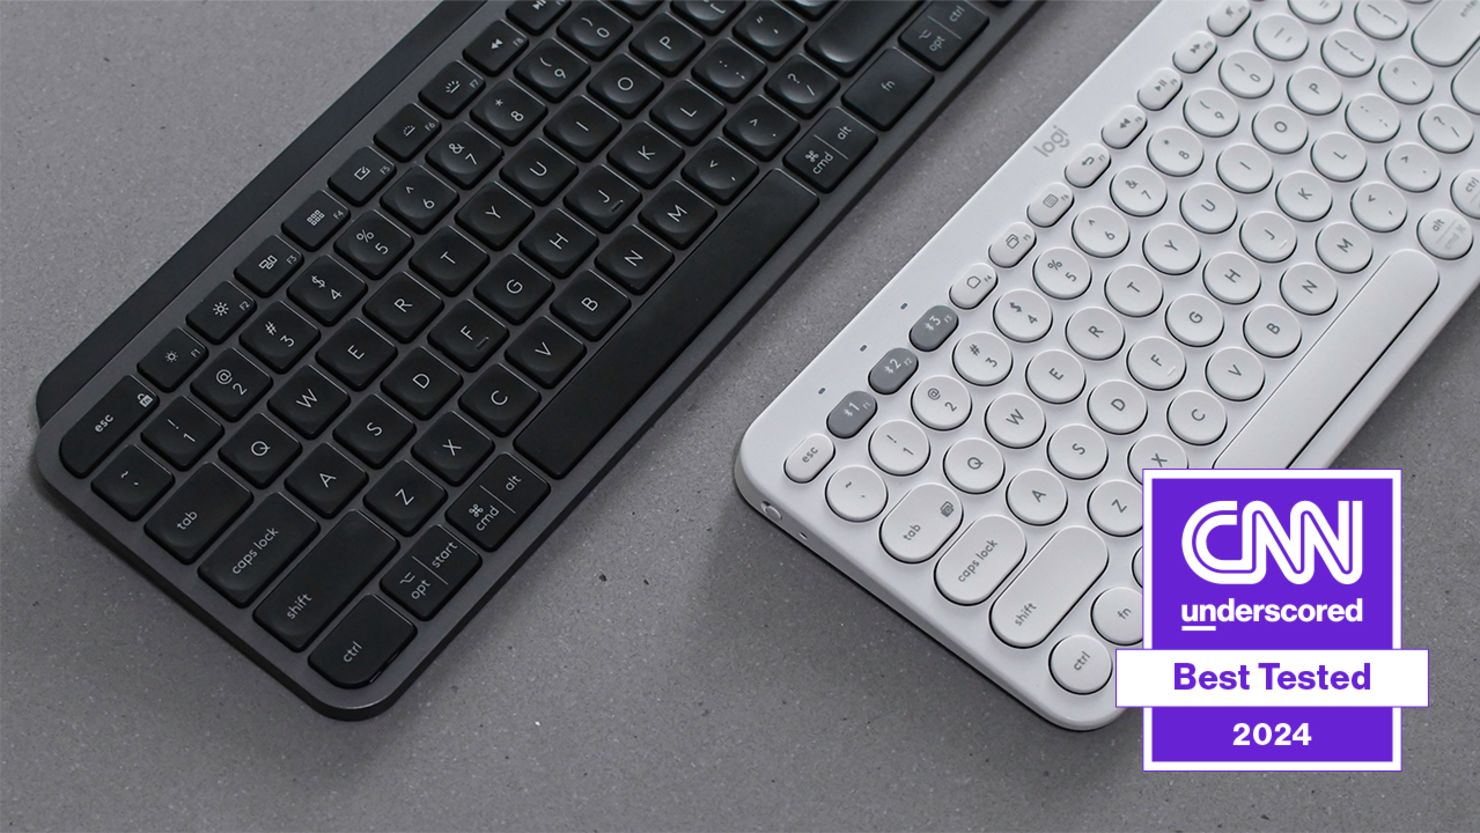 Best keyboards of CNN tried 2024, and Underscored tested 